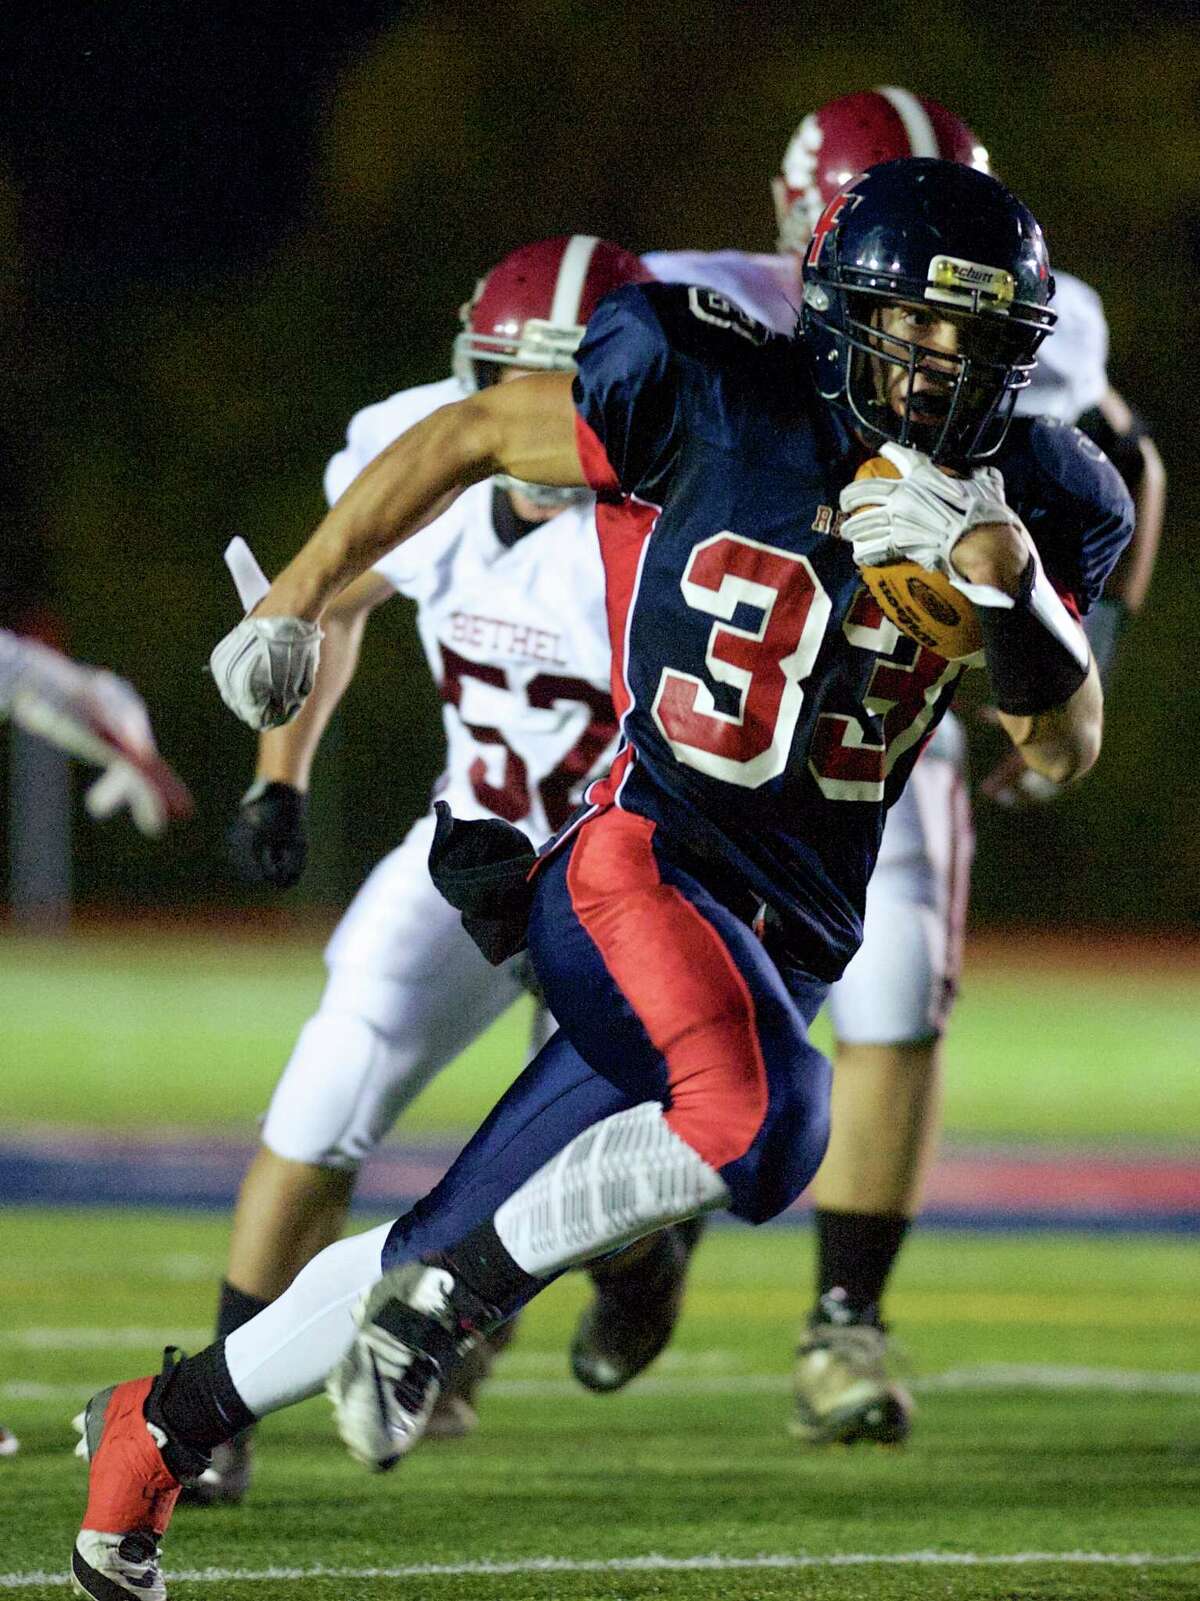 New Fairfield's Zachary Tripodi (33) runs with the ball during a football game between Bethel and New Fairfield High Schools , on Thursday, October 2, 2014, in New Fairfield, Conn.